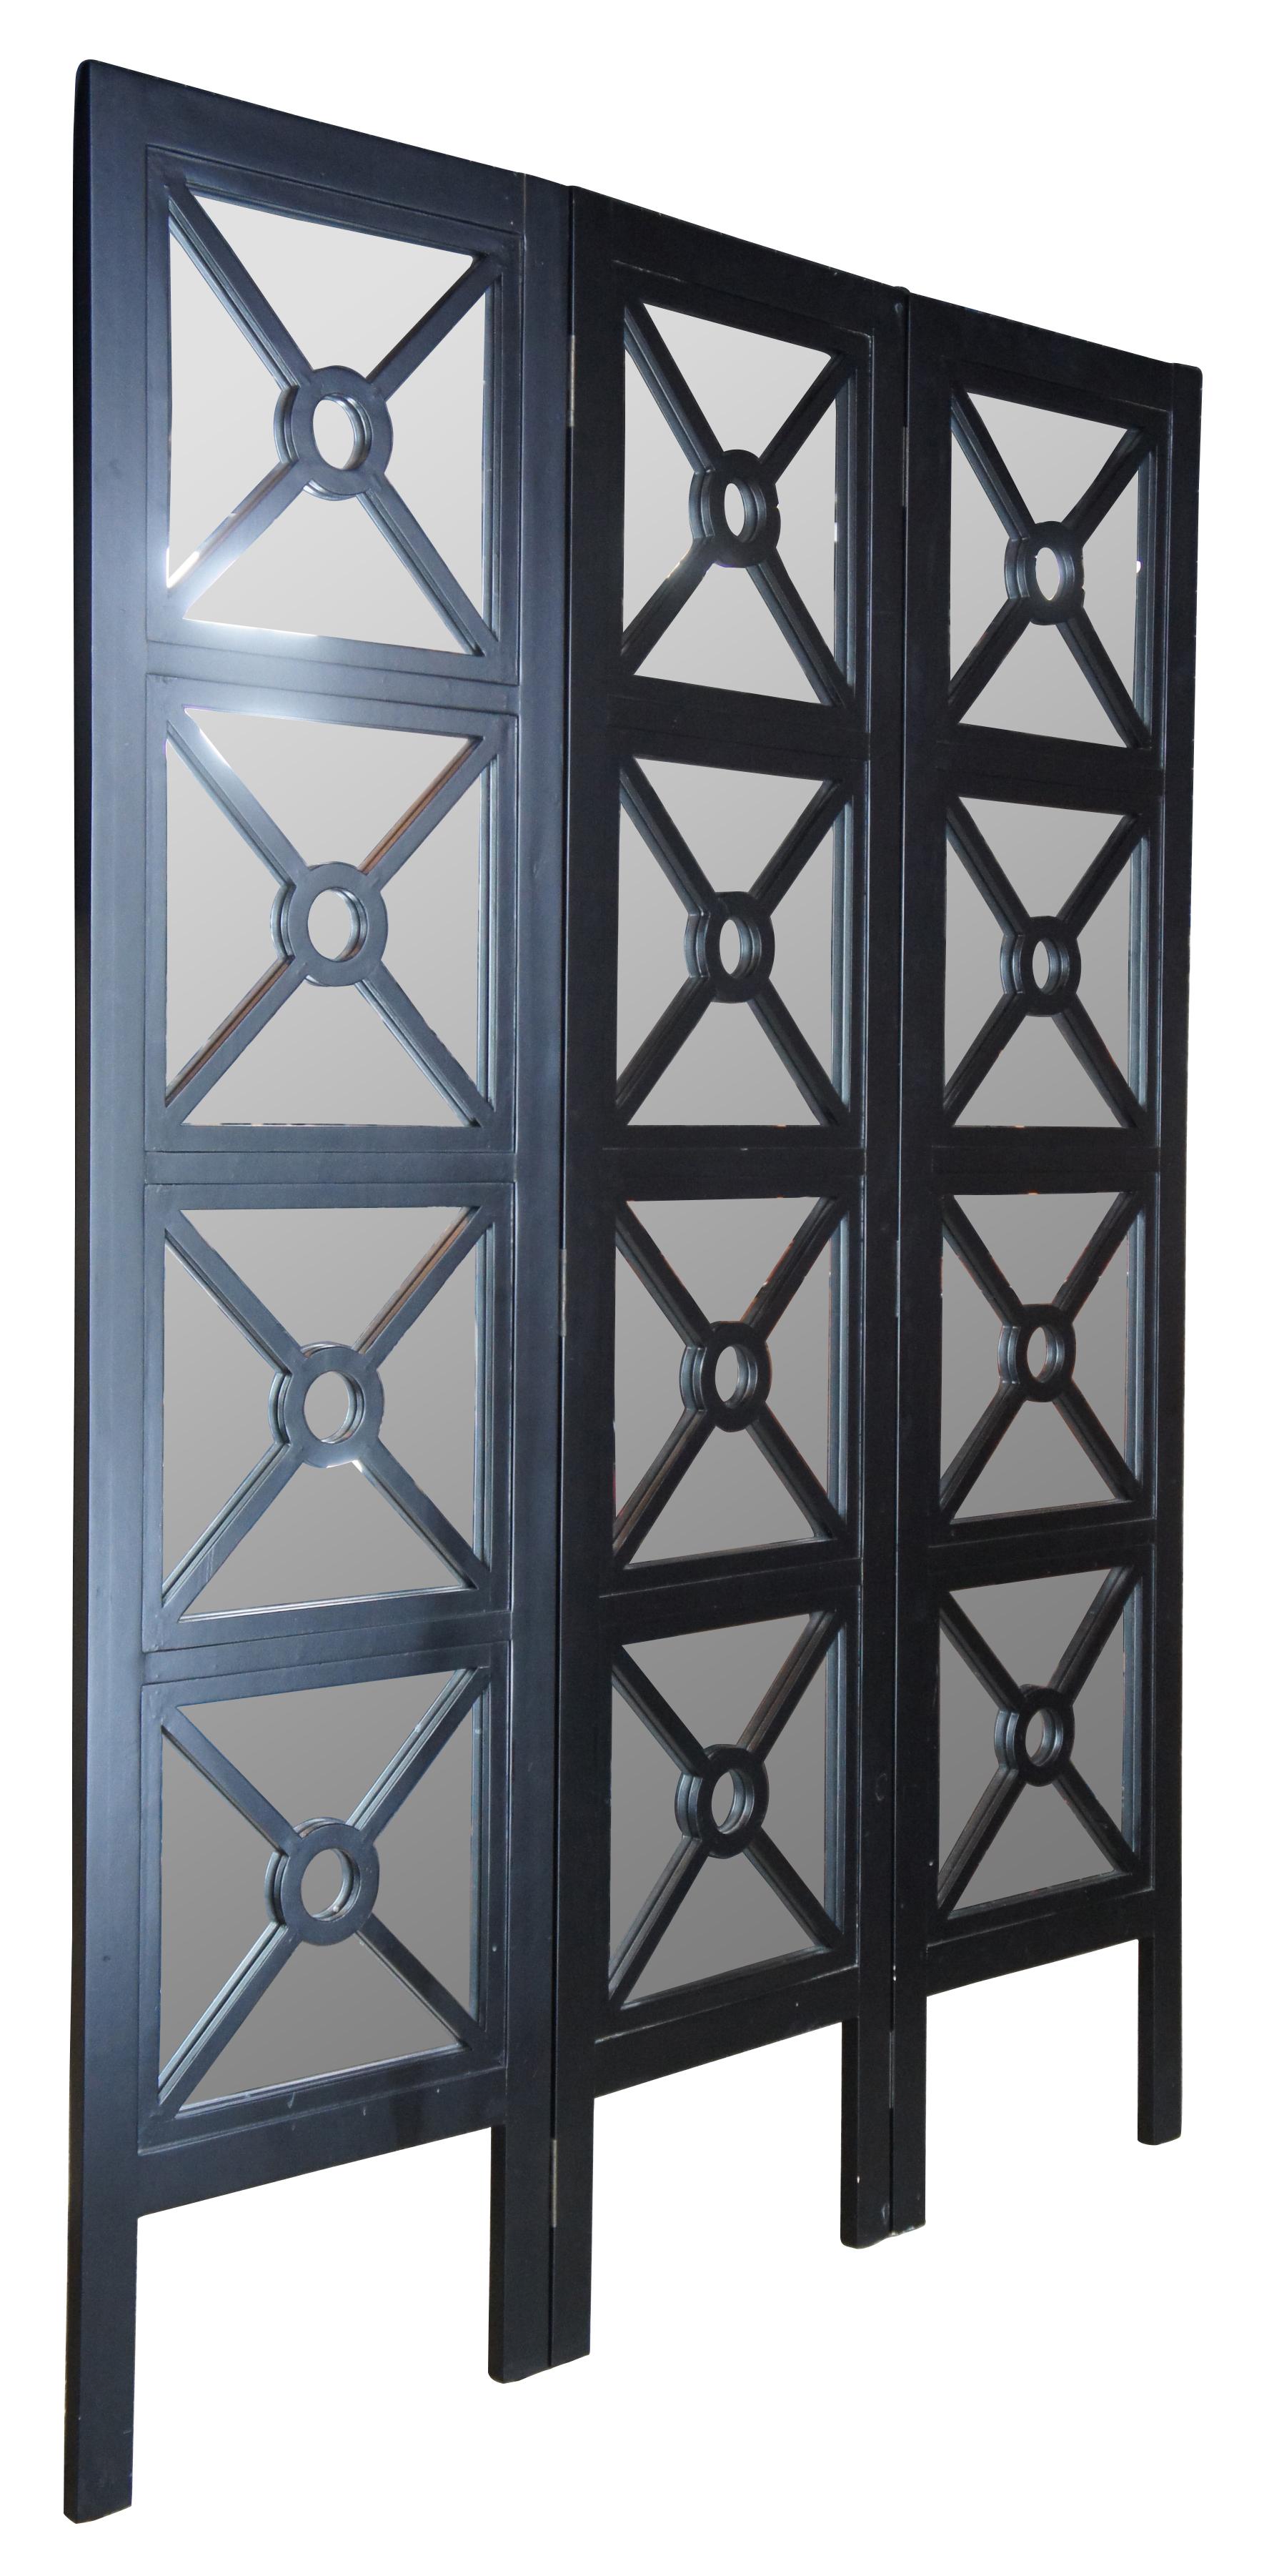 Vintage three panel modern neoclassical revival folding screen. Features a black wooden frame with geometric X design over mirrored accents. 

3 Panels, 18